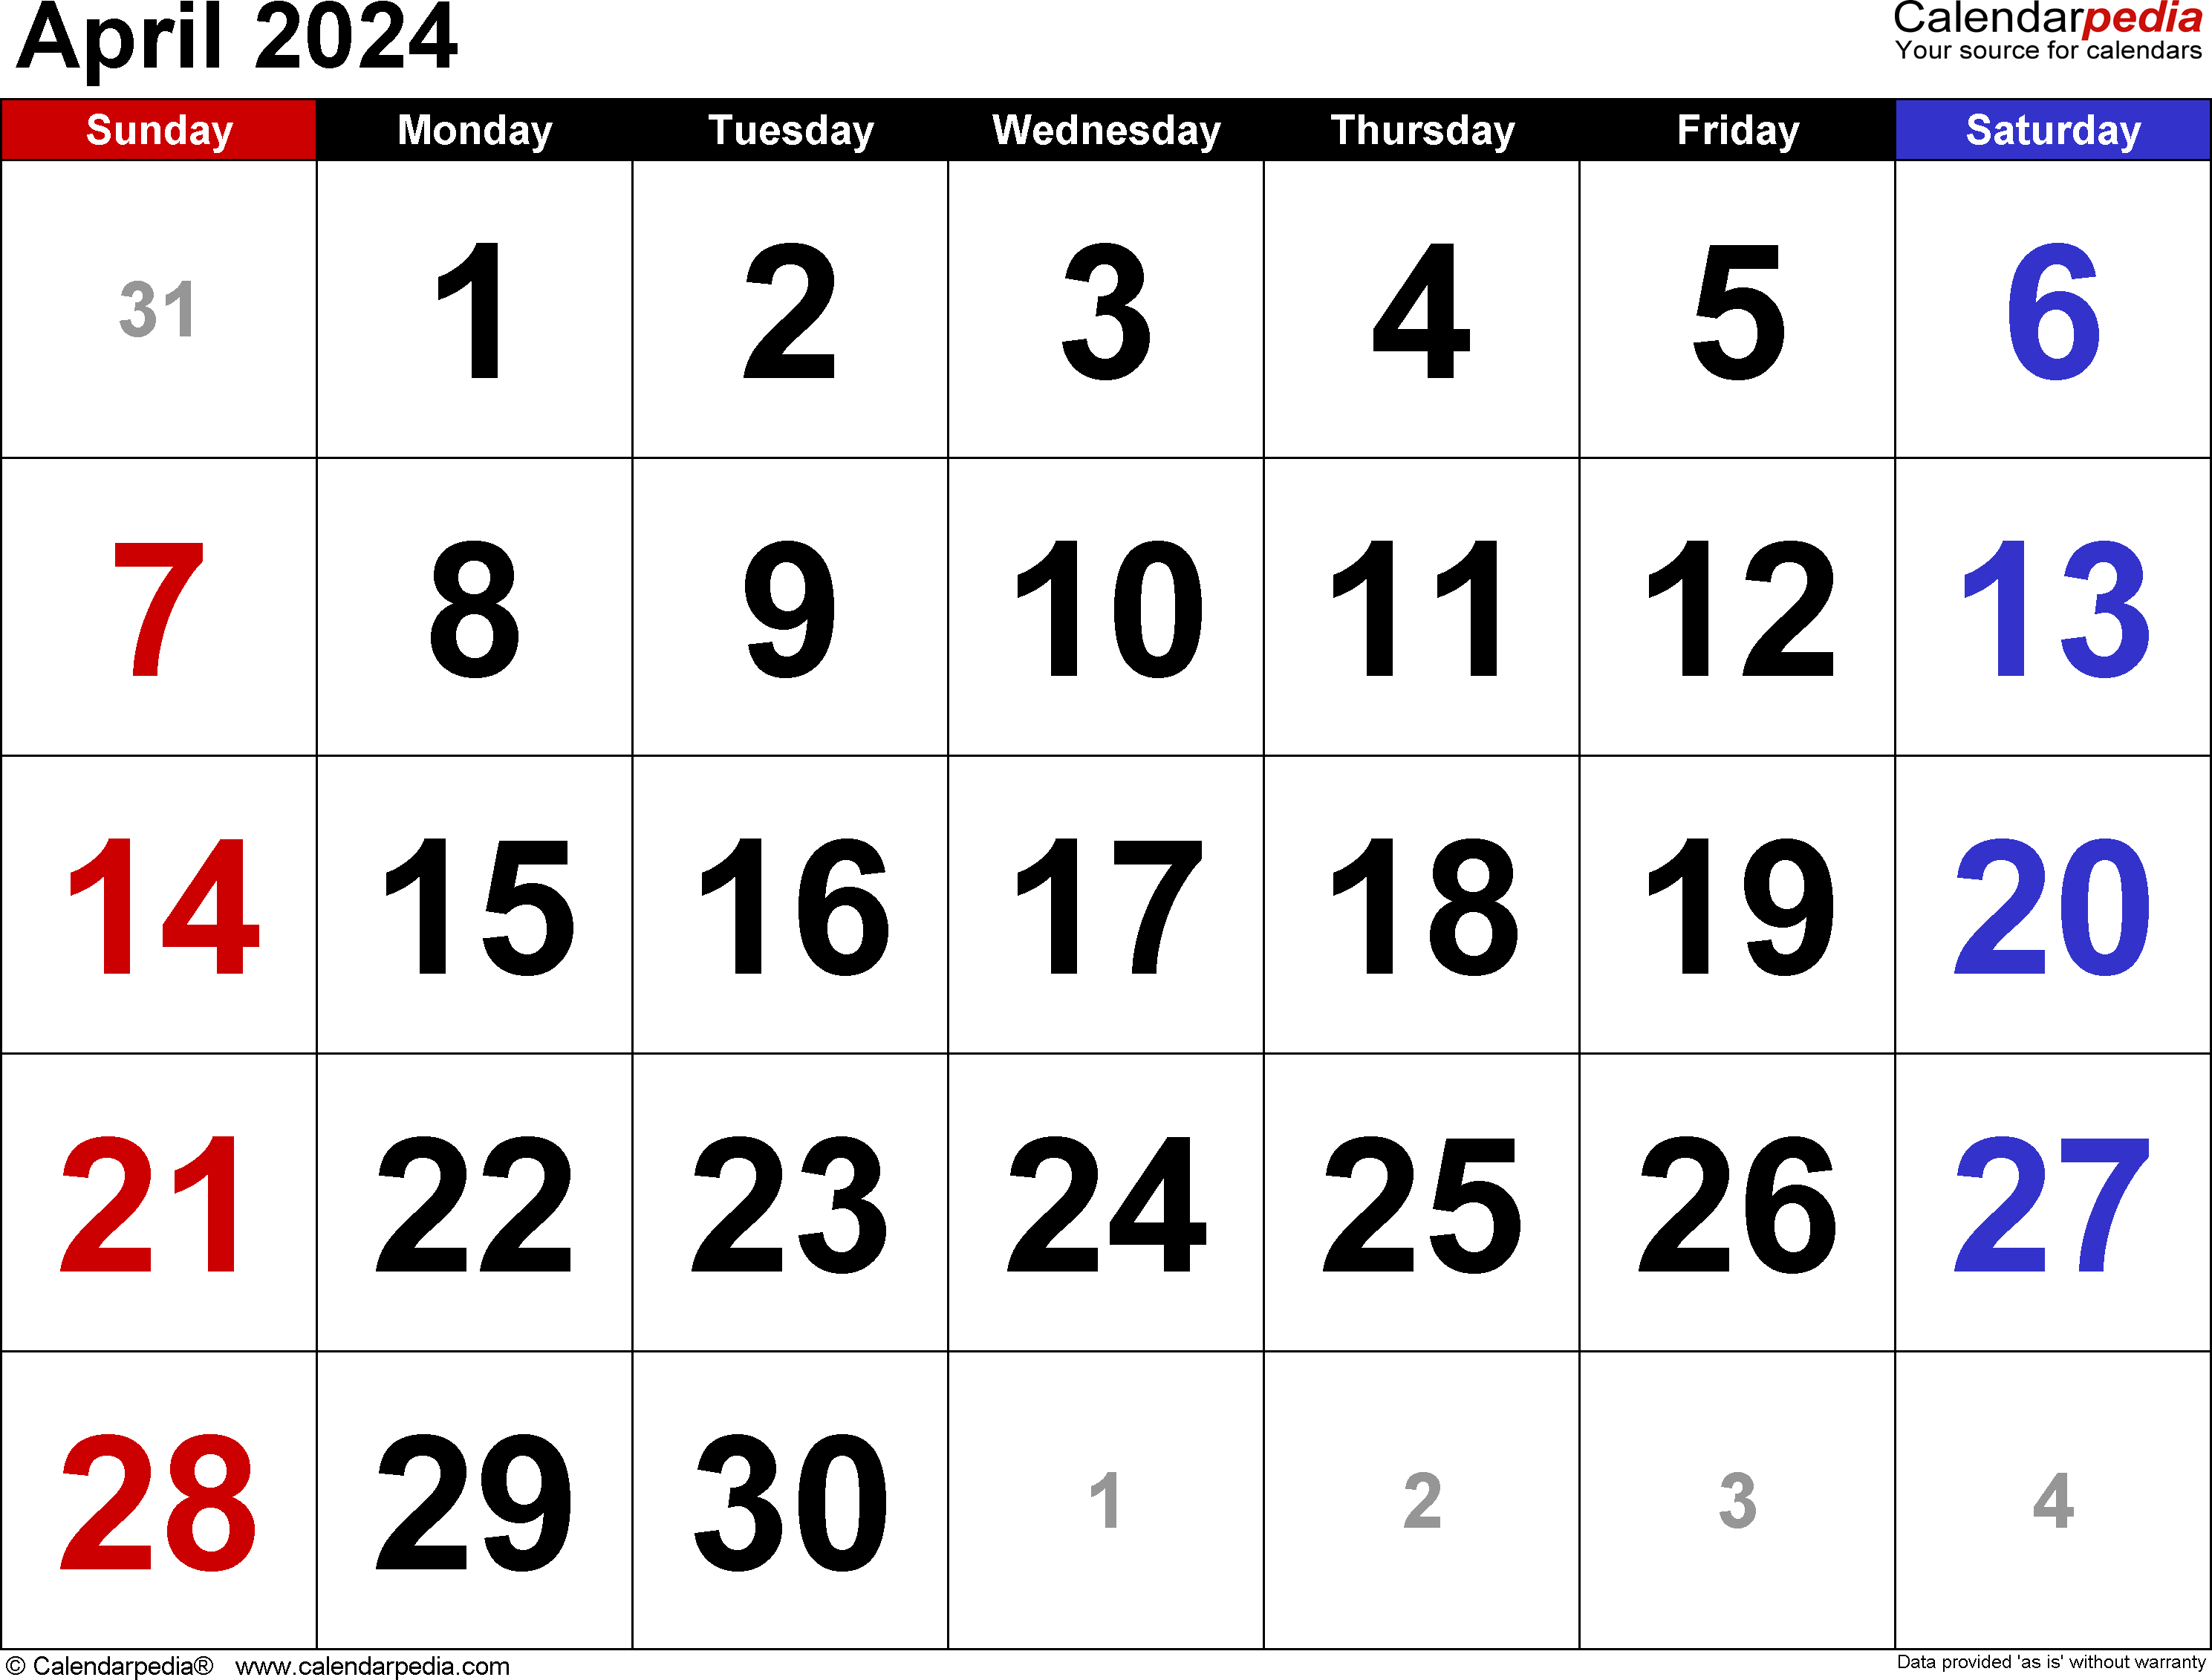 April 2024 Calendar | Templates For Word, Excel And Pdf within Show April 2024 Calendar